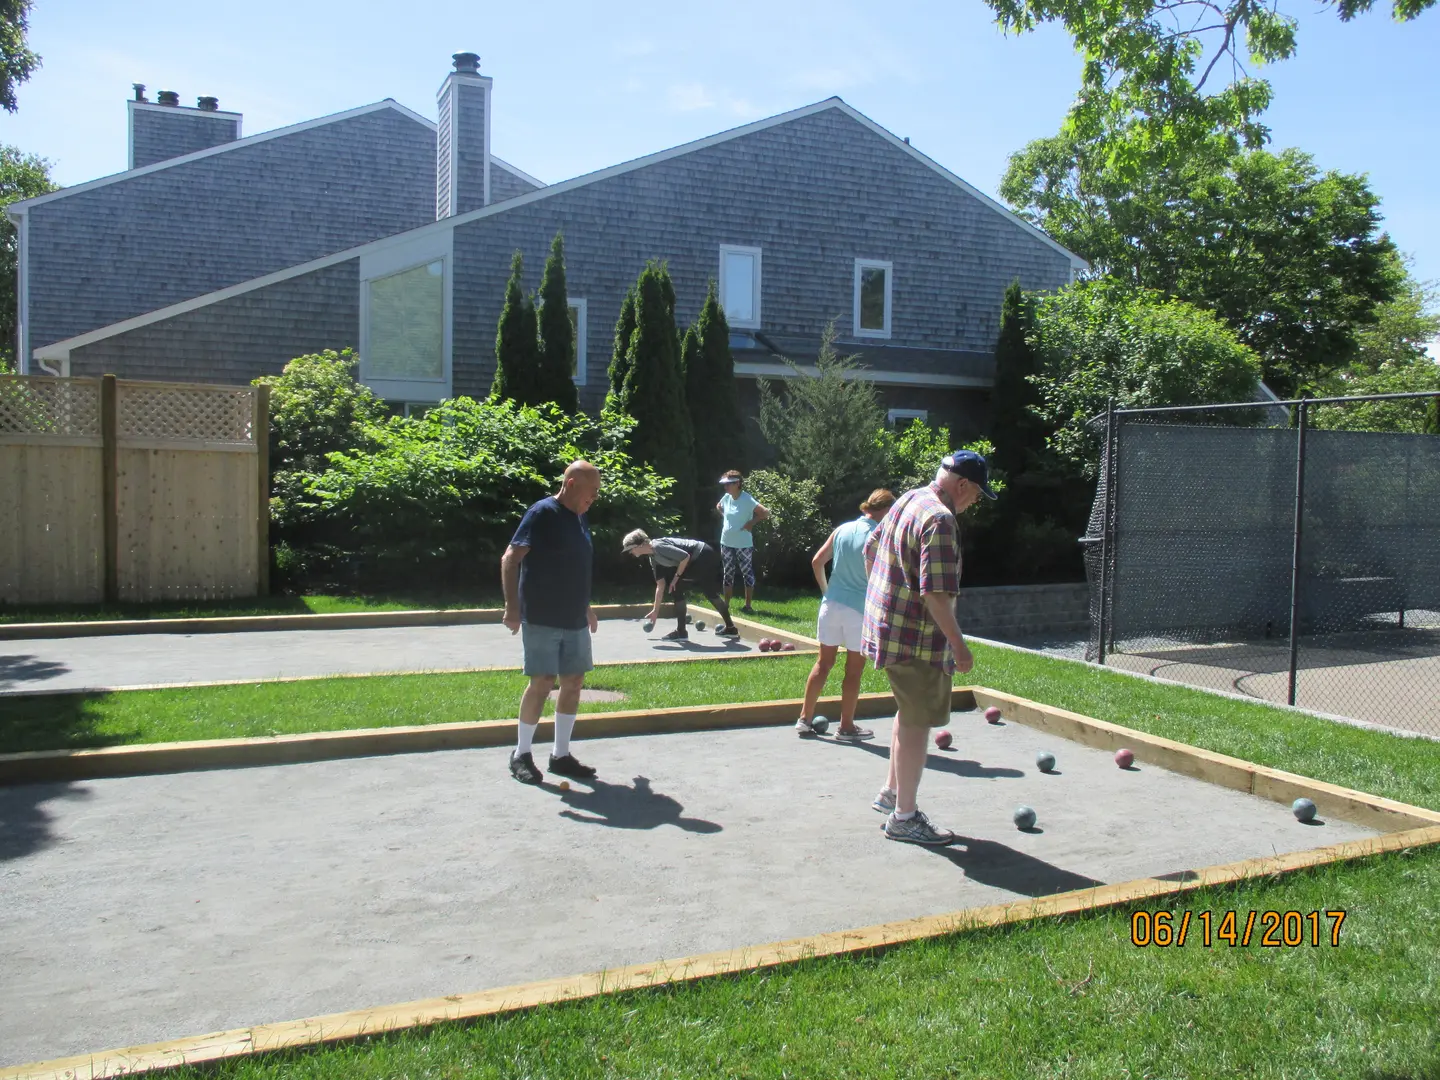 A group of people playing with bowls in the yard.